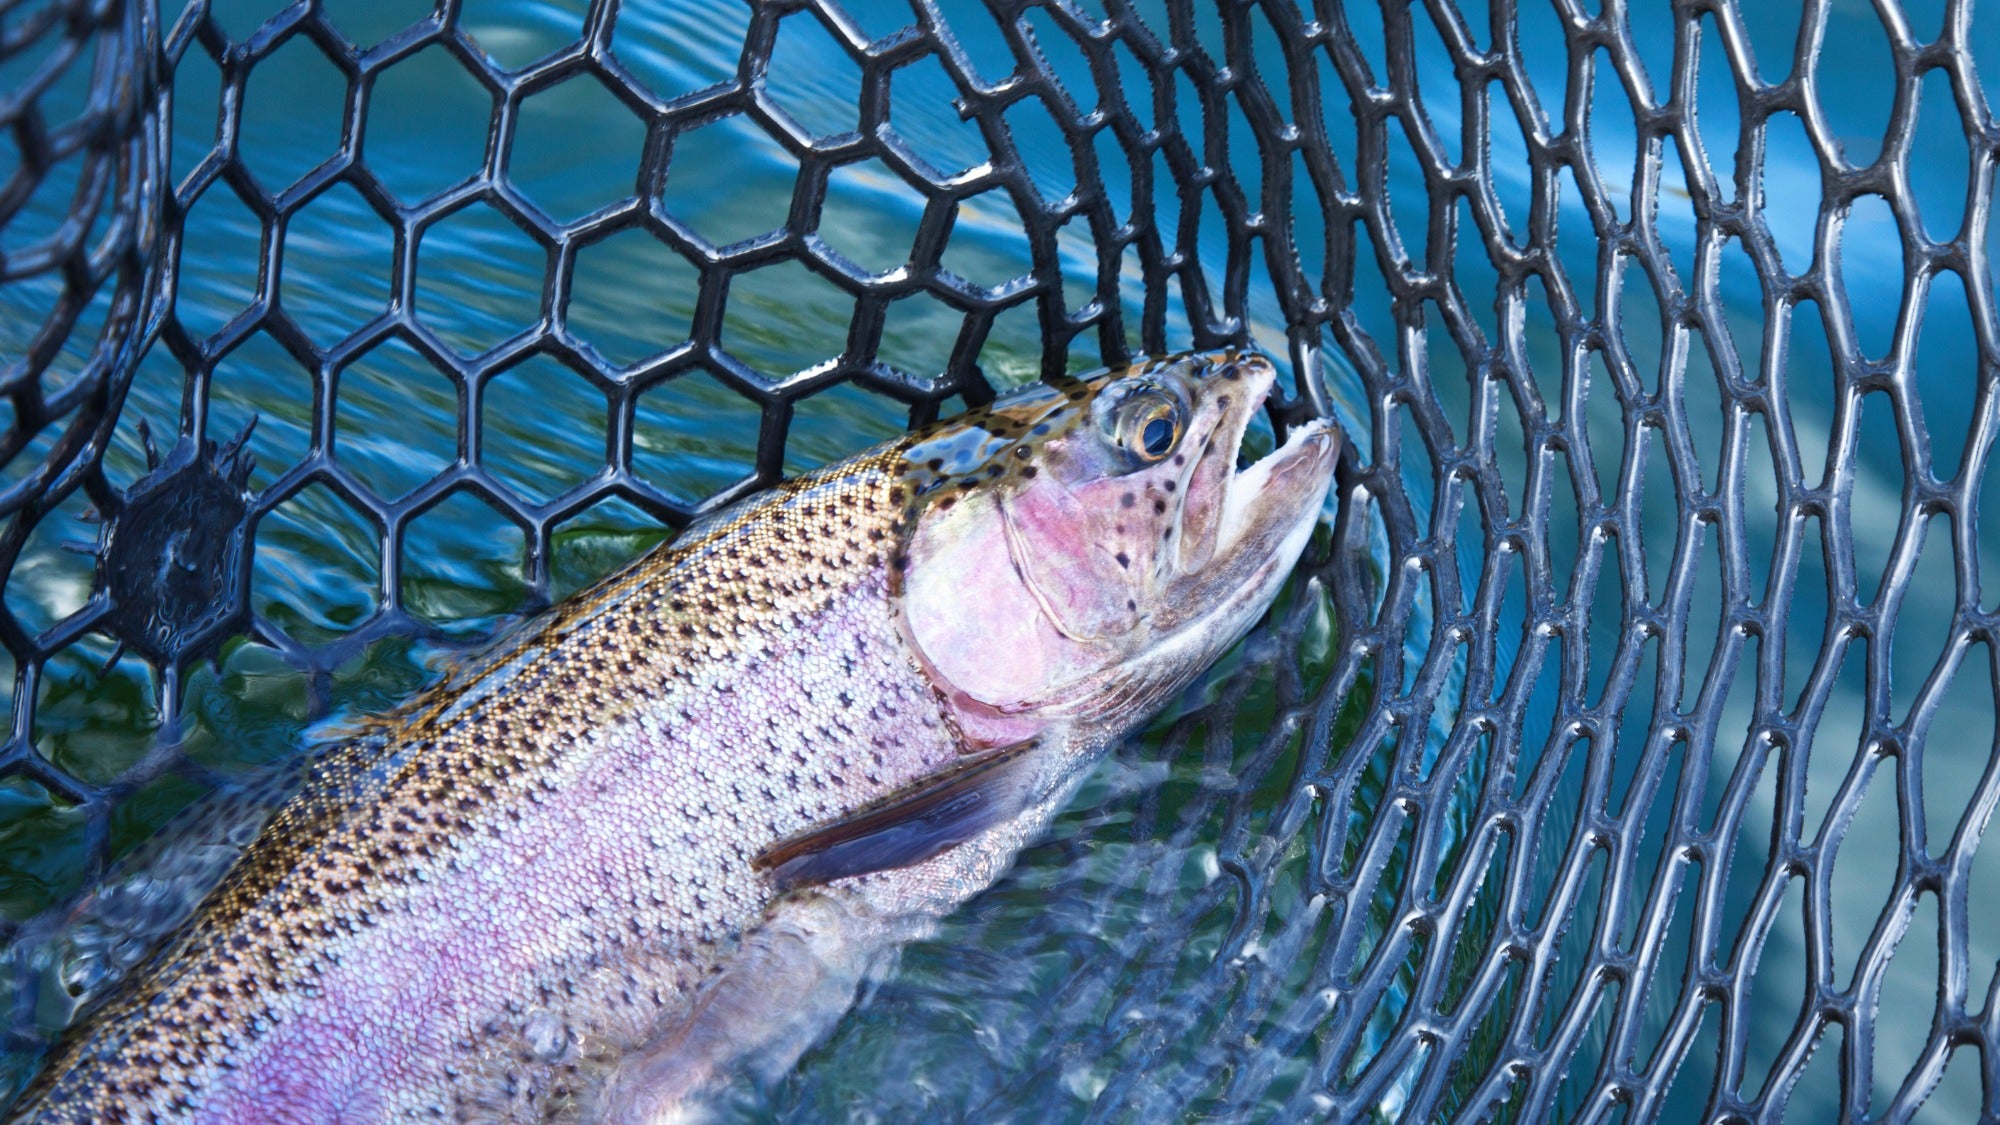 How plastic opens rainbow trout up to condition